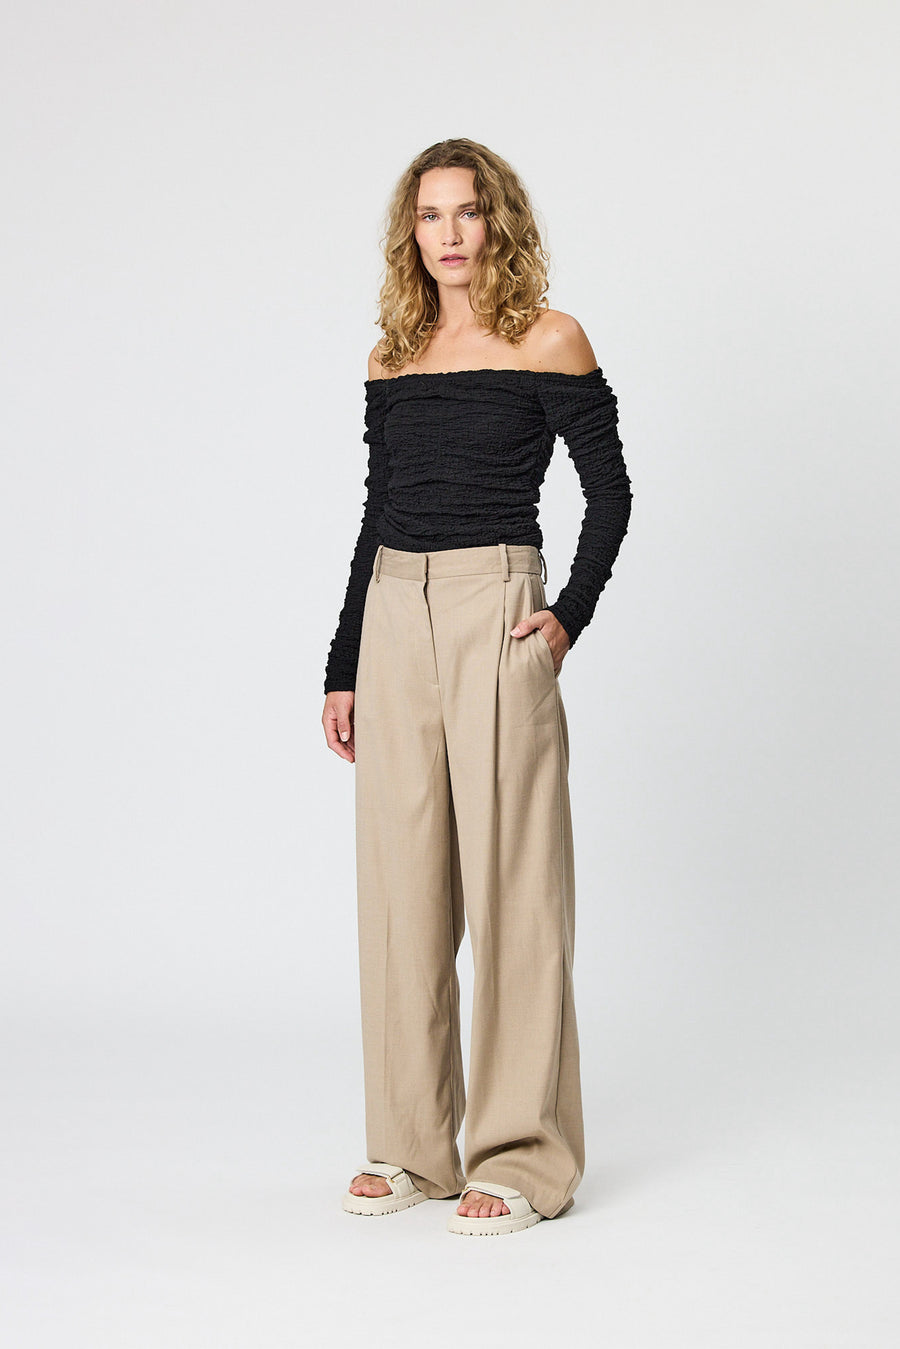 EVIE TAILORED PANTS - OAT